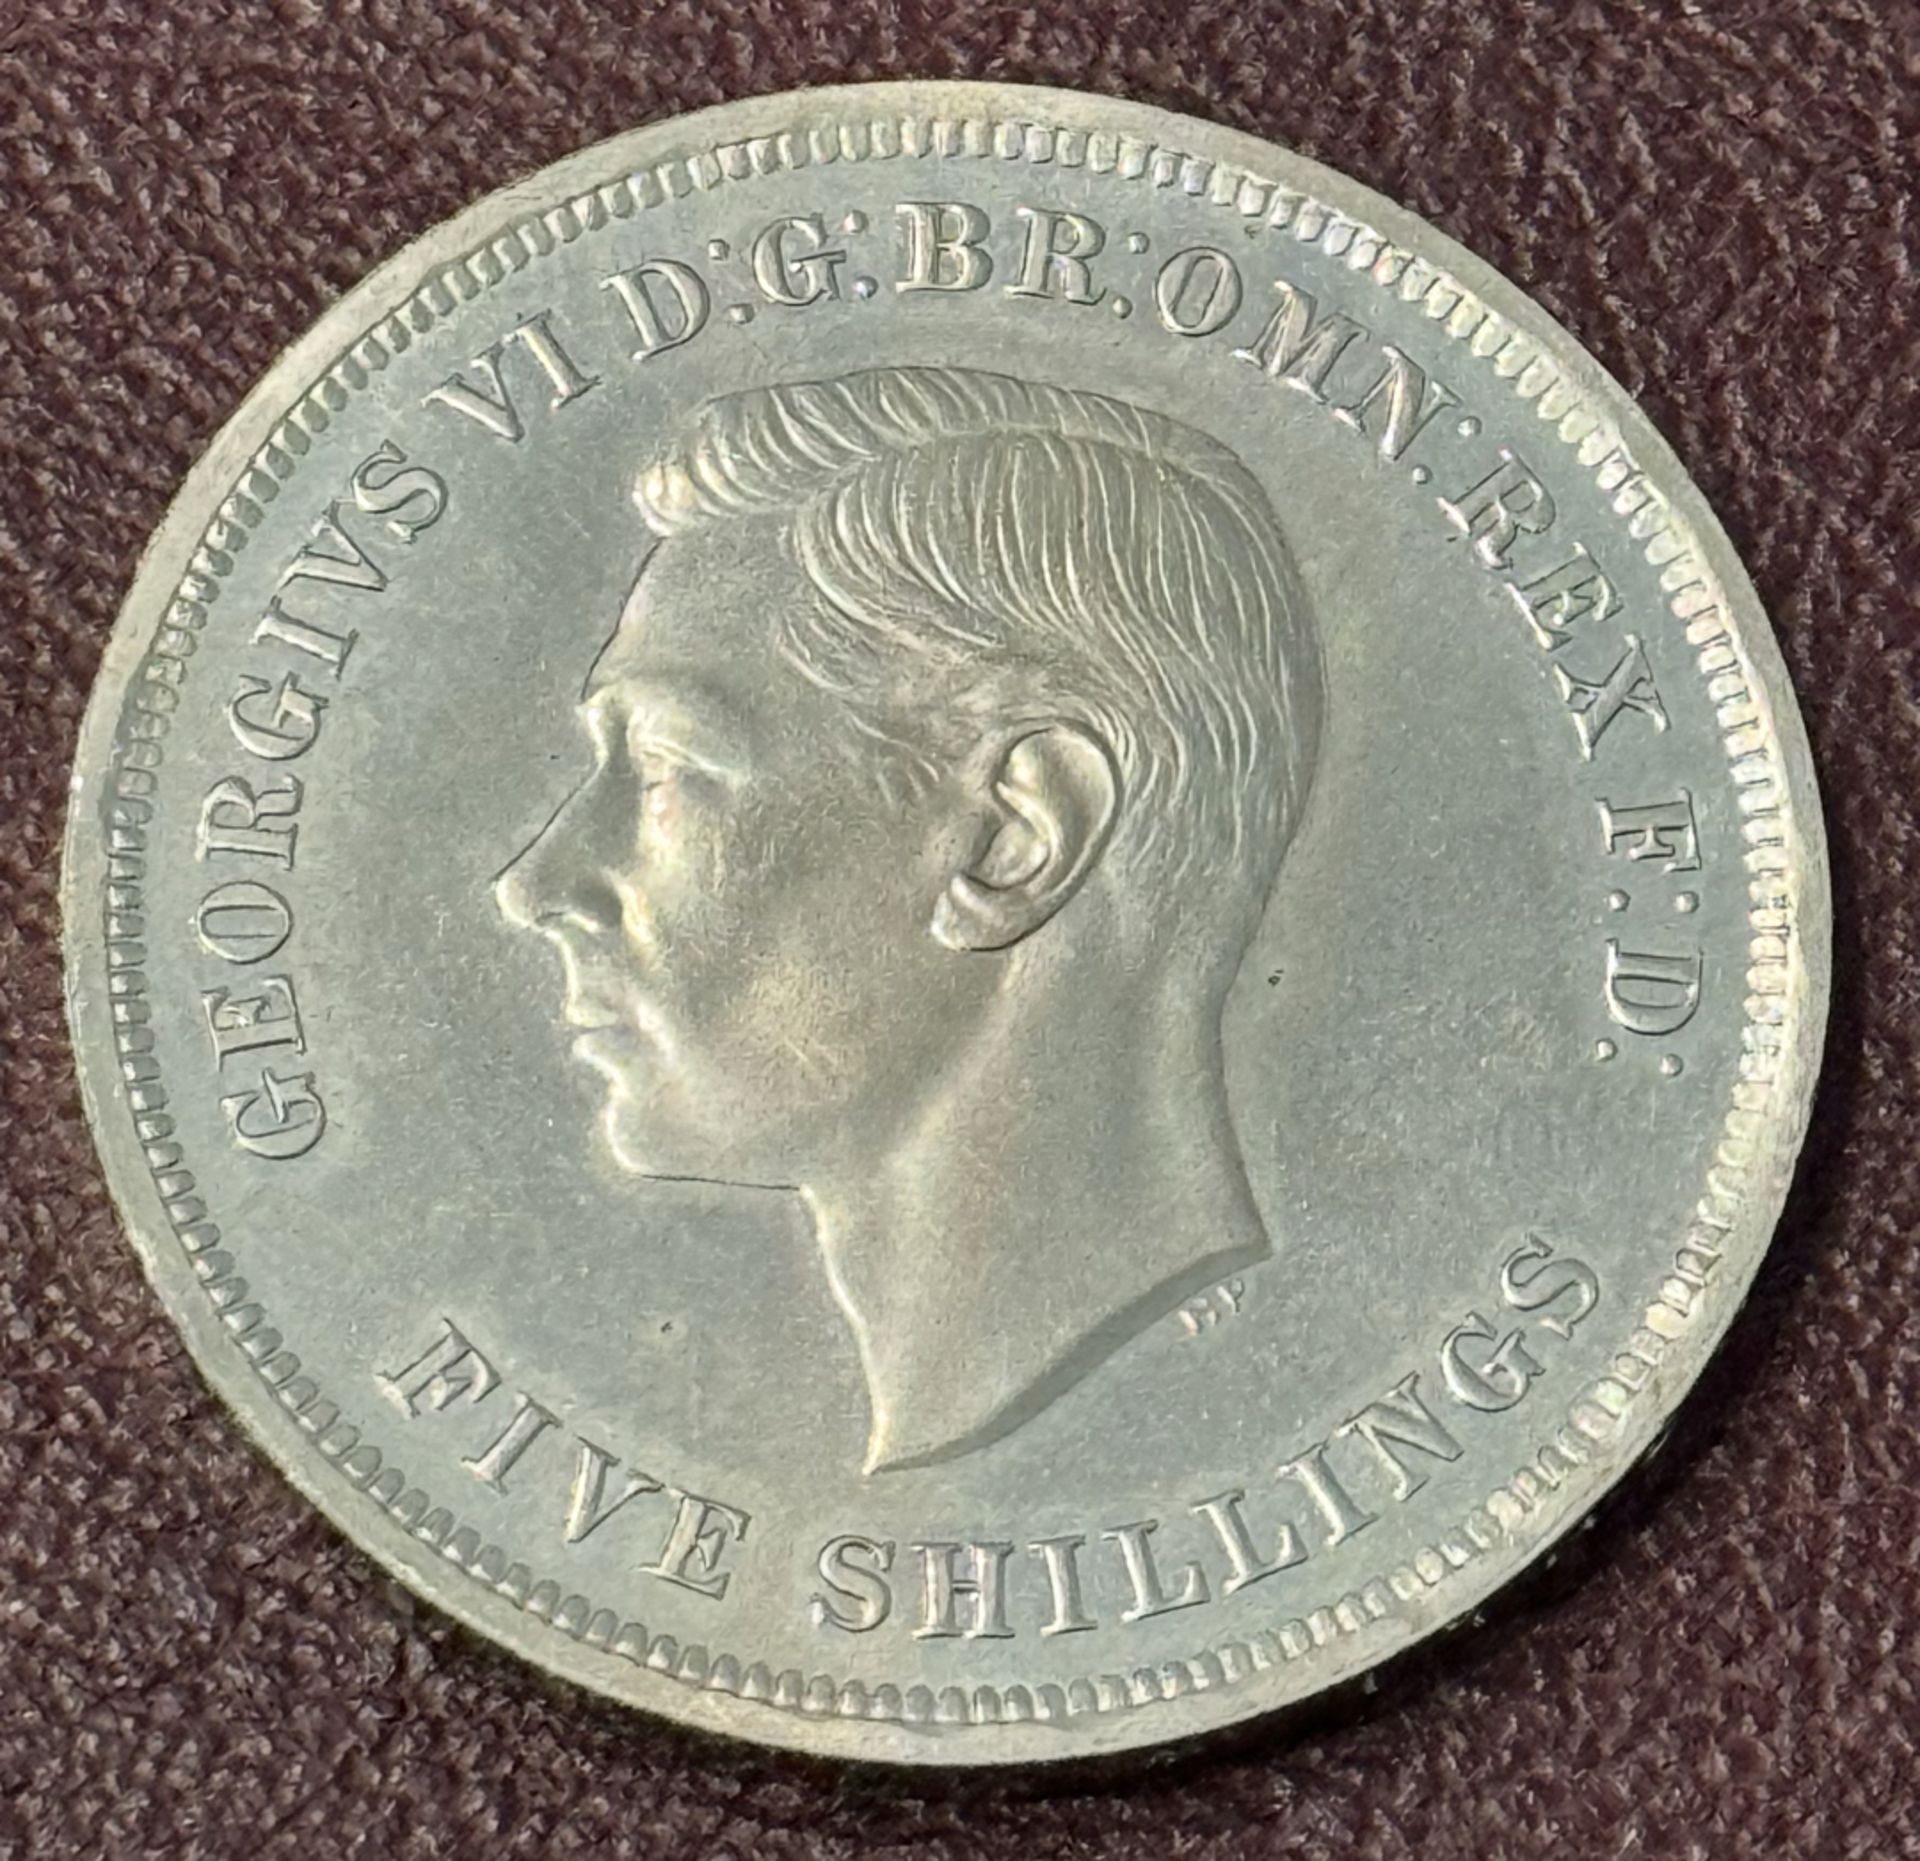 Five Shilling Coin 1951 - Great Britain Crown, George VI with Dragon - Festival of Britain - Image 2 of 2